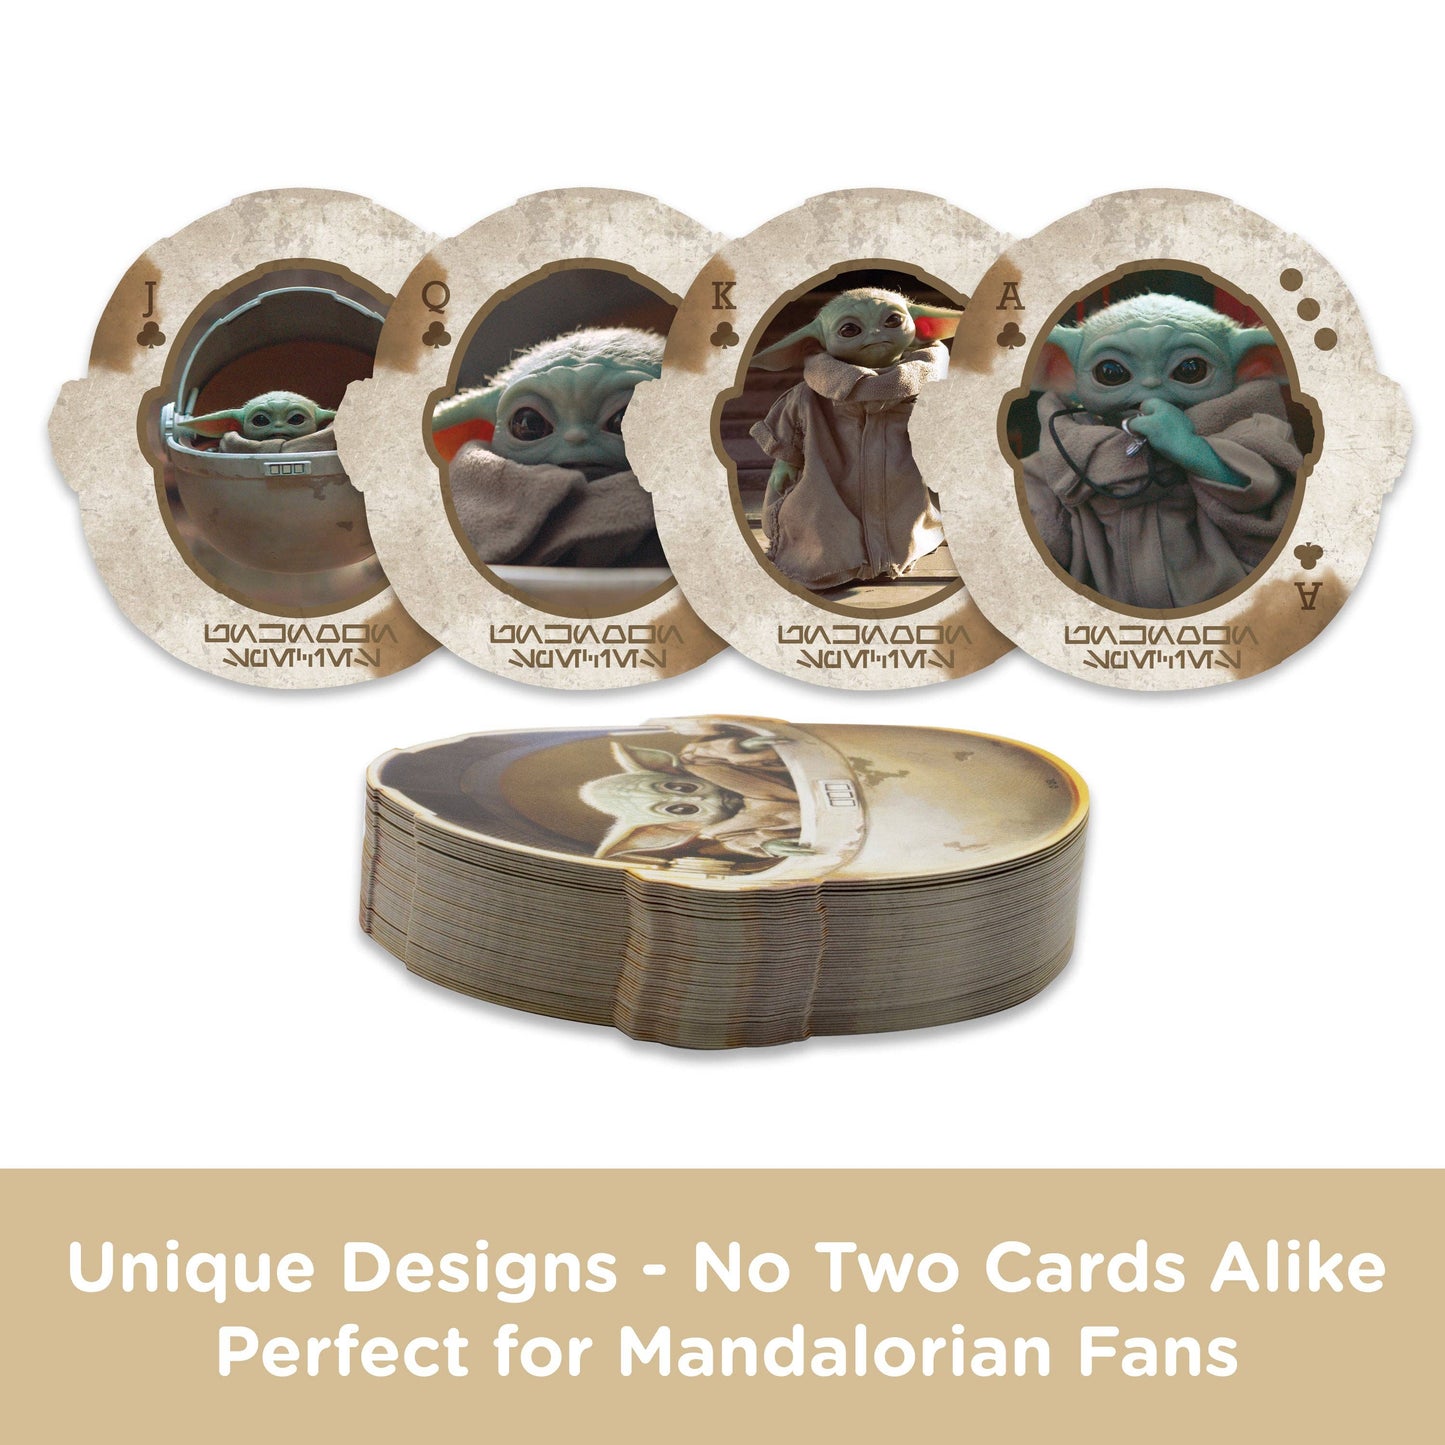 The Mandalorian- The Child Shaped Playing Cards